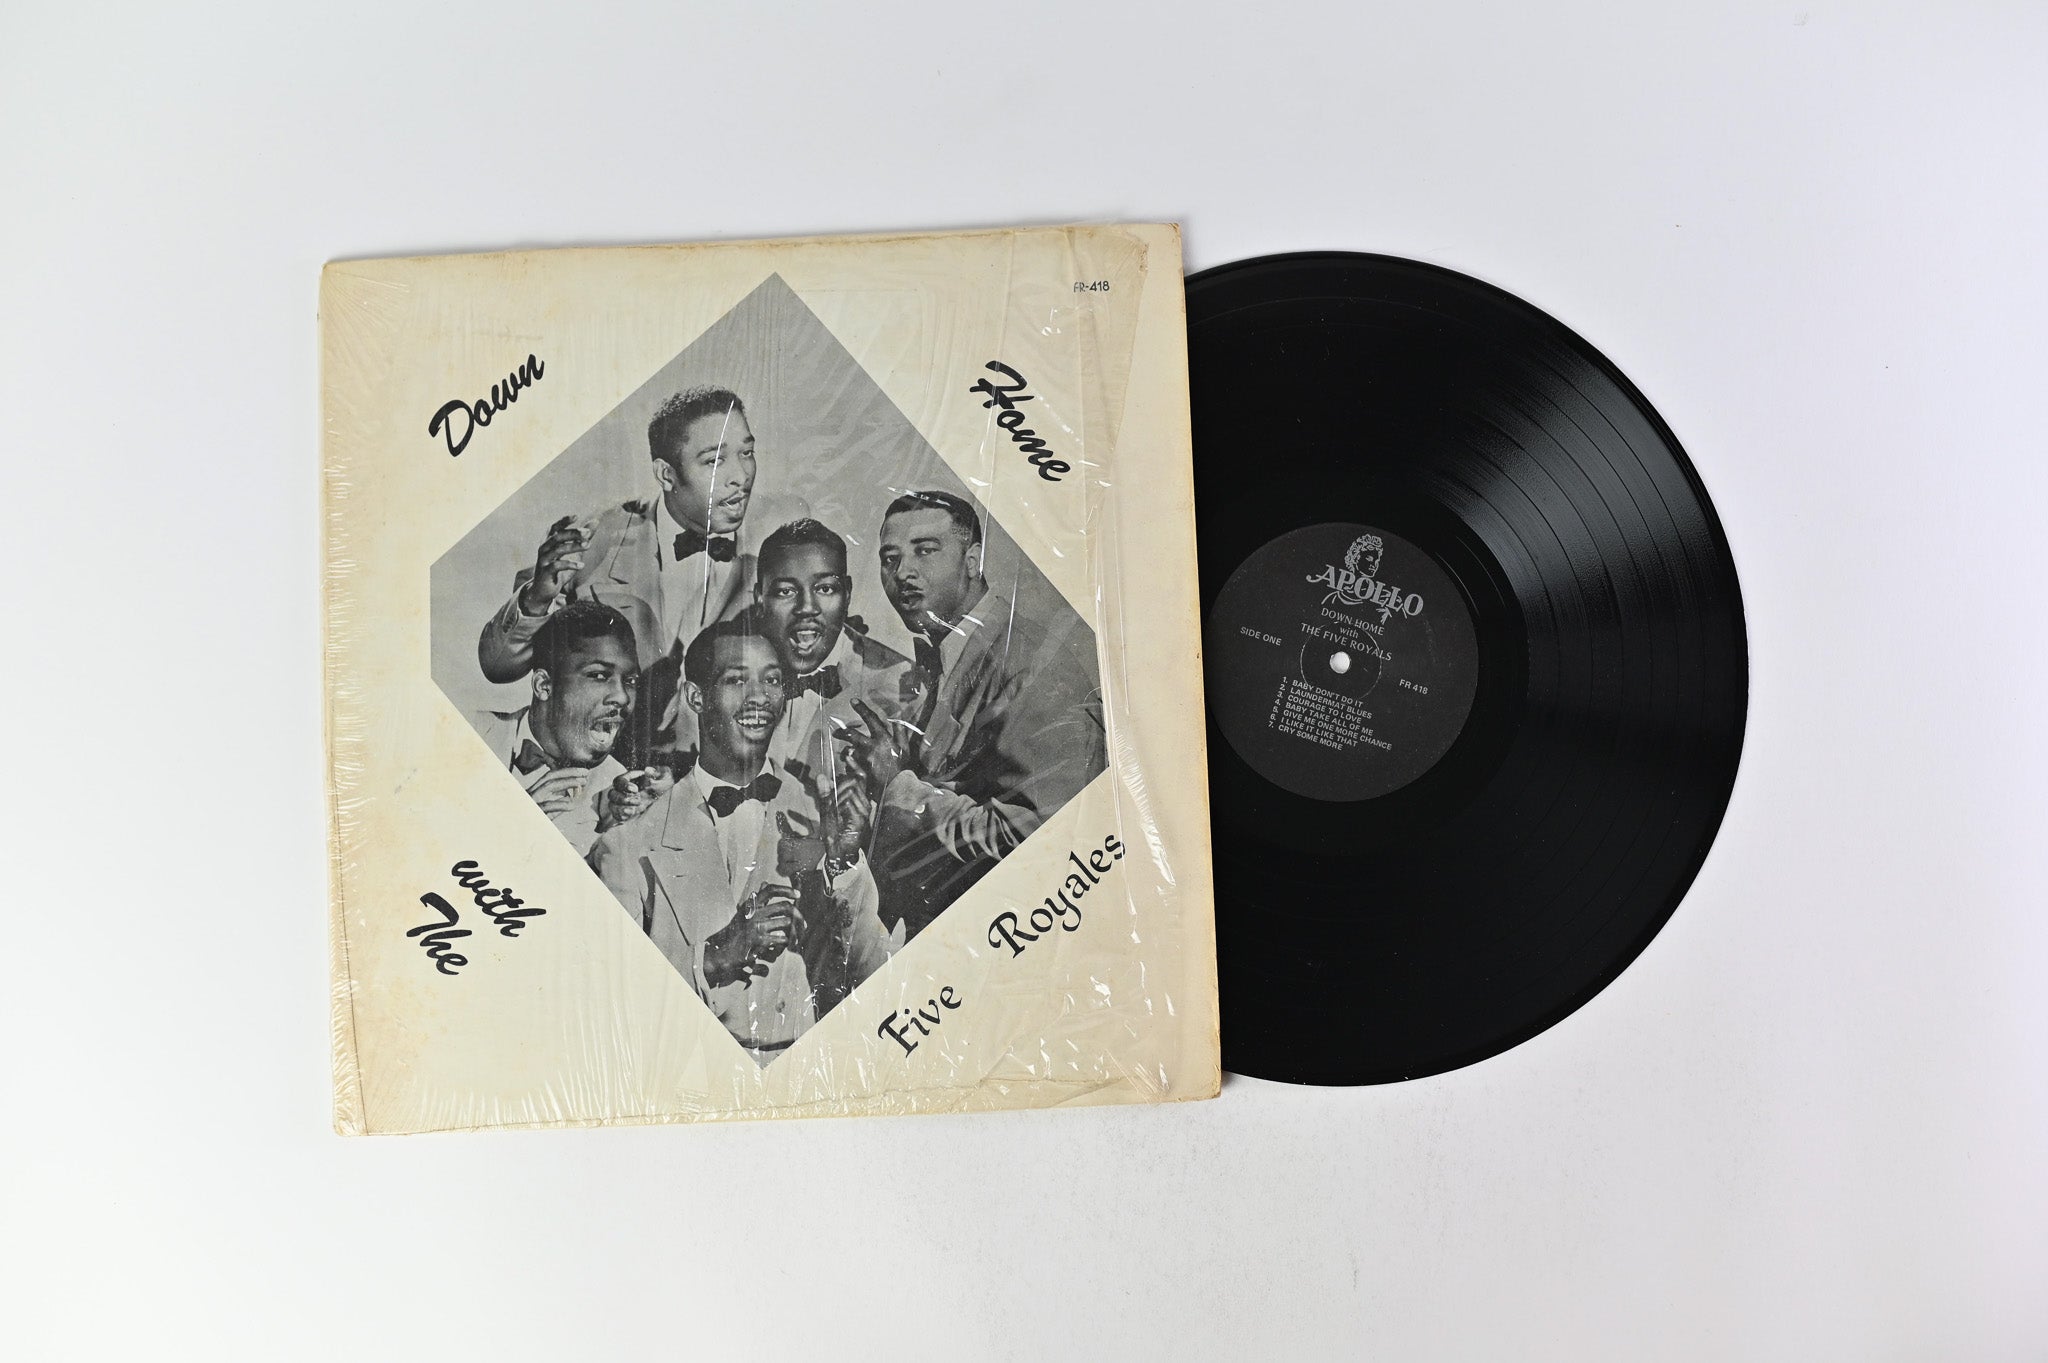 The 5 Royales - Down Home With The Five Royales on Apollo Records